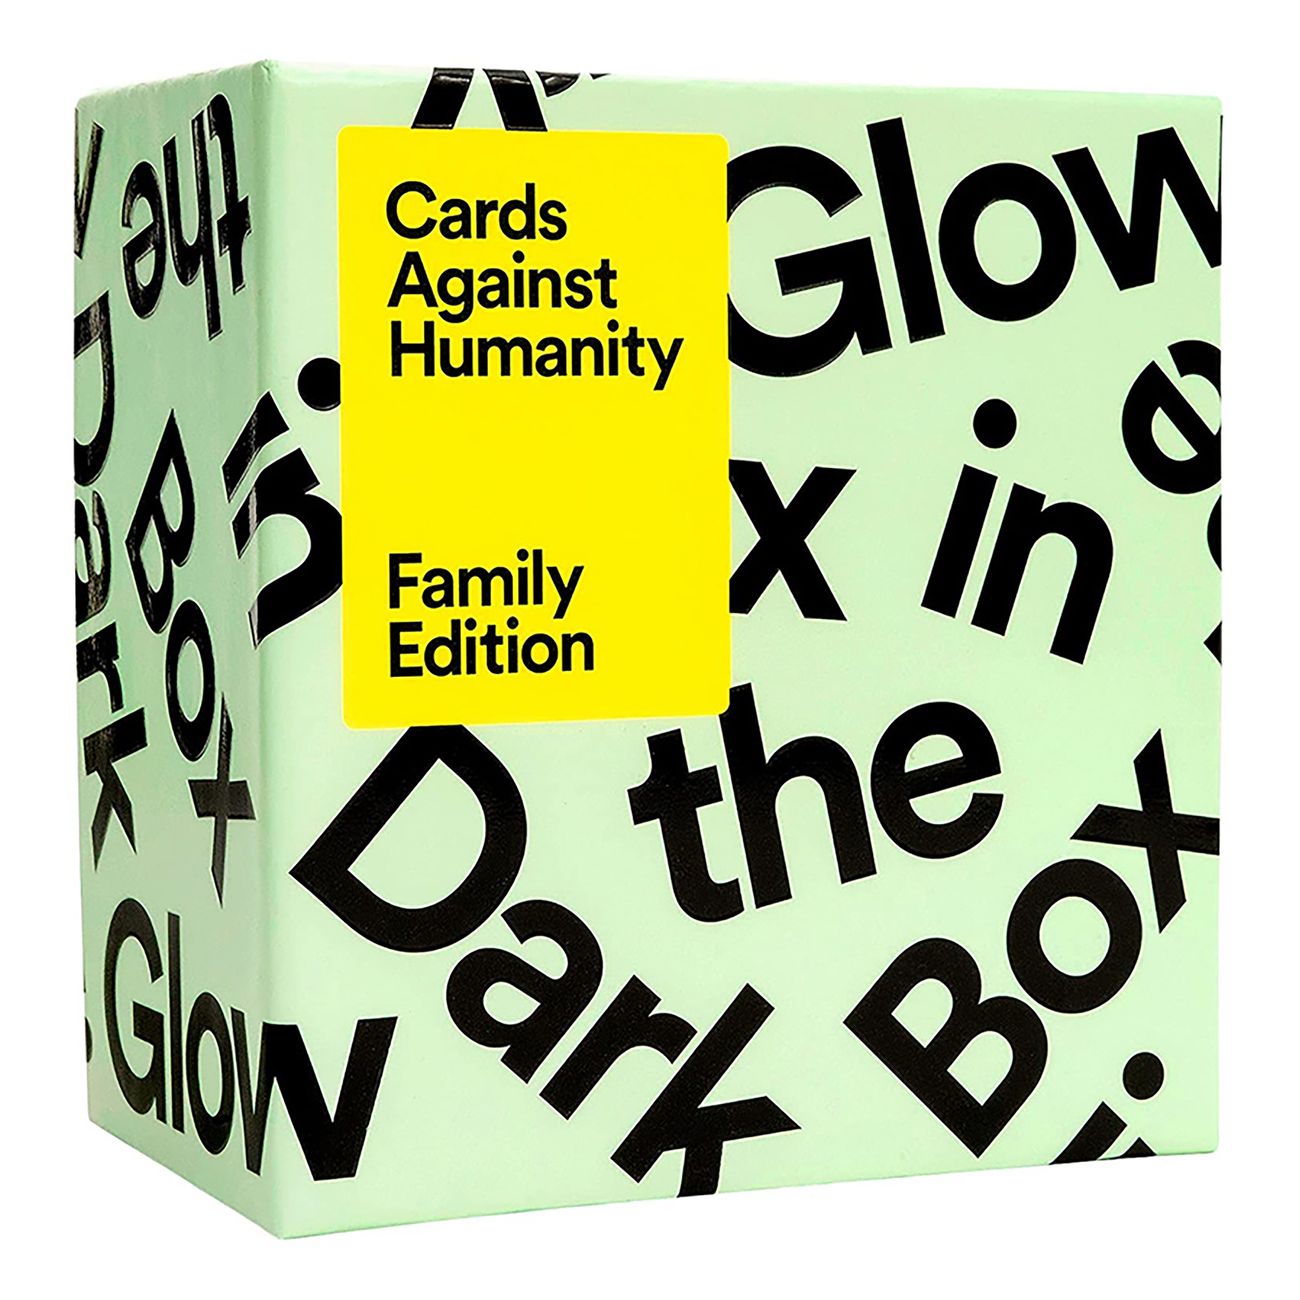 cards-against-humanity-family-edition-glow-in-the-dark-box-en-90978-1